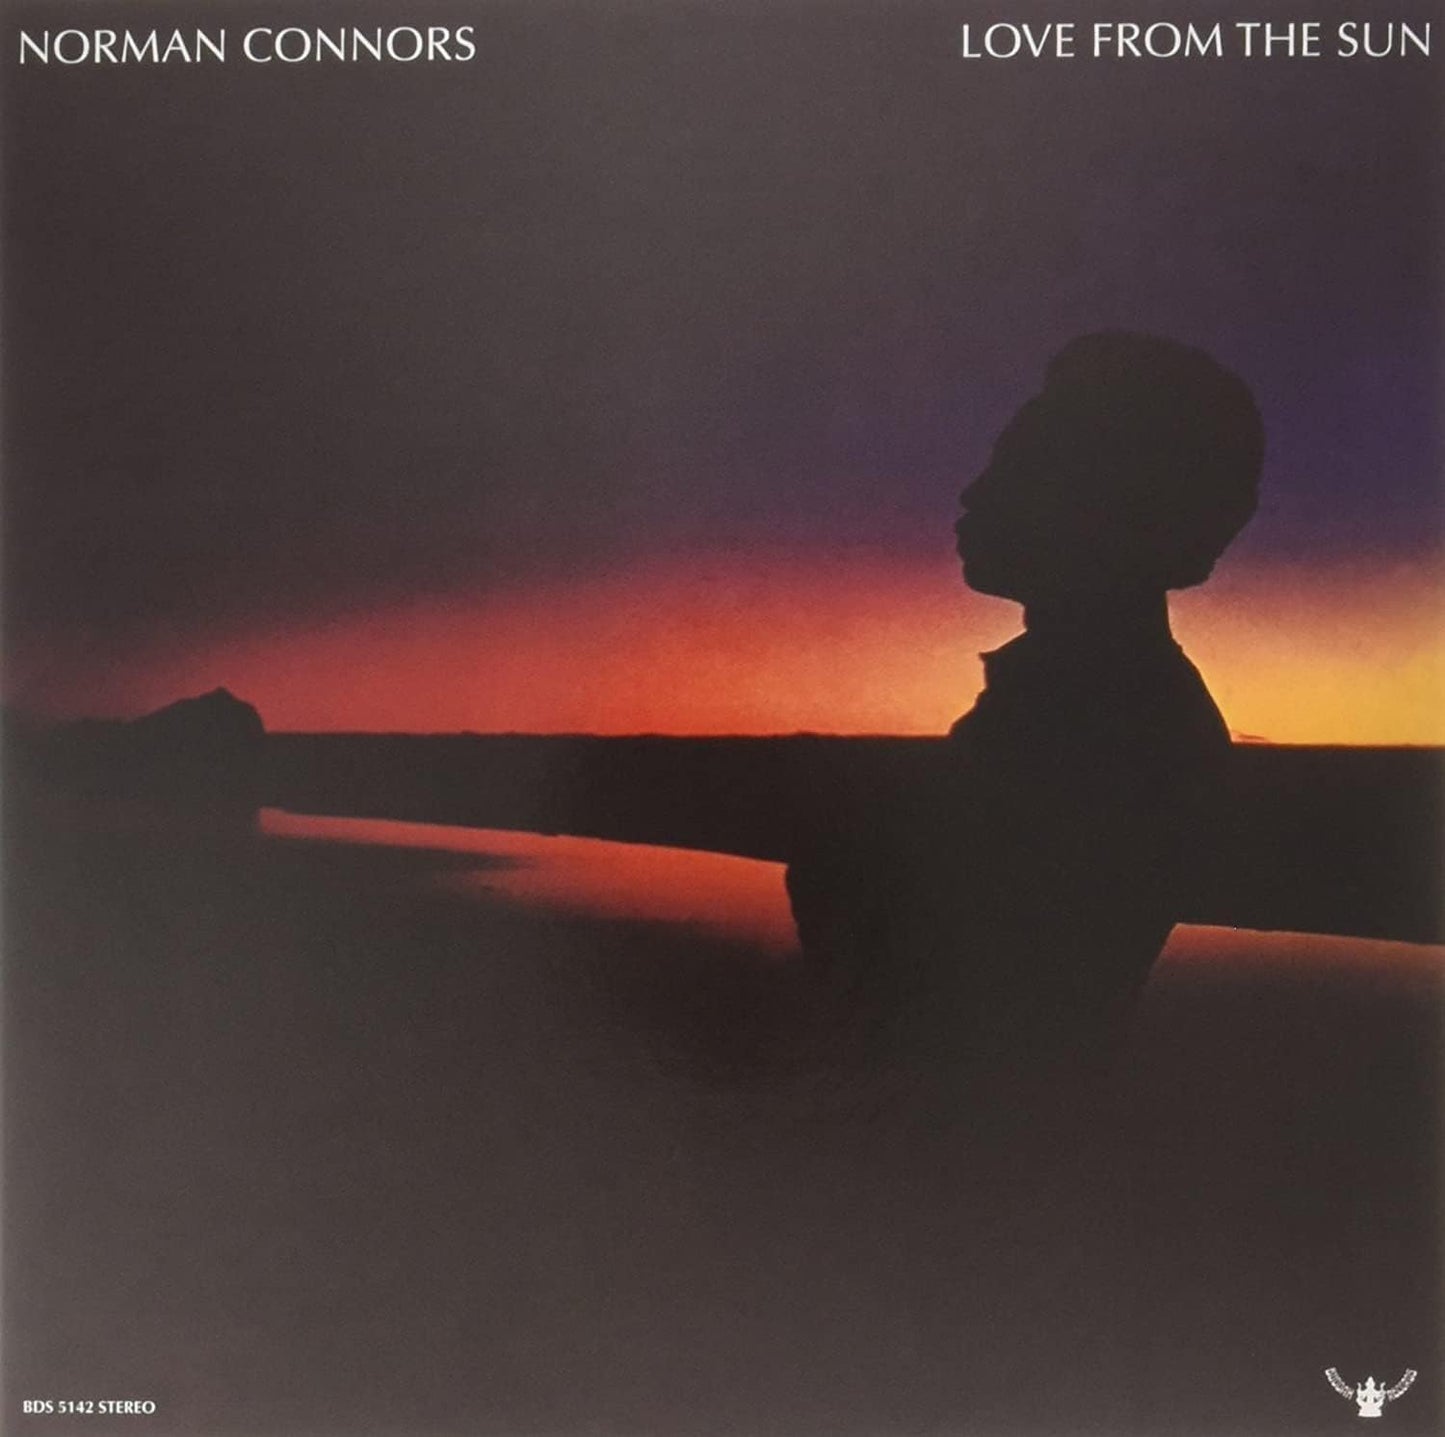 Norman Connors - Love from the sun (Vinile 180gr.)